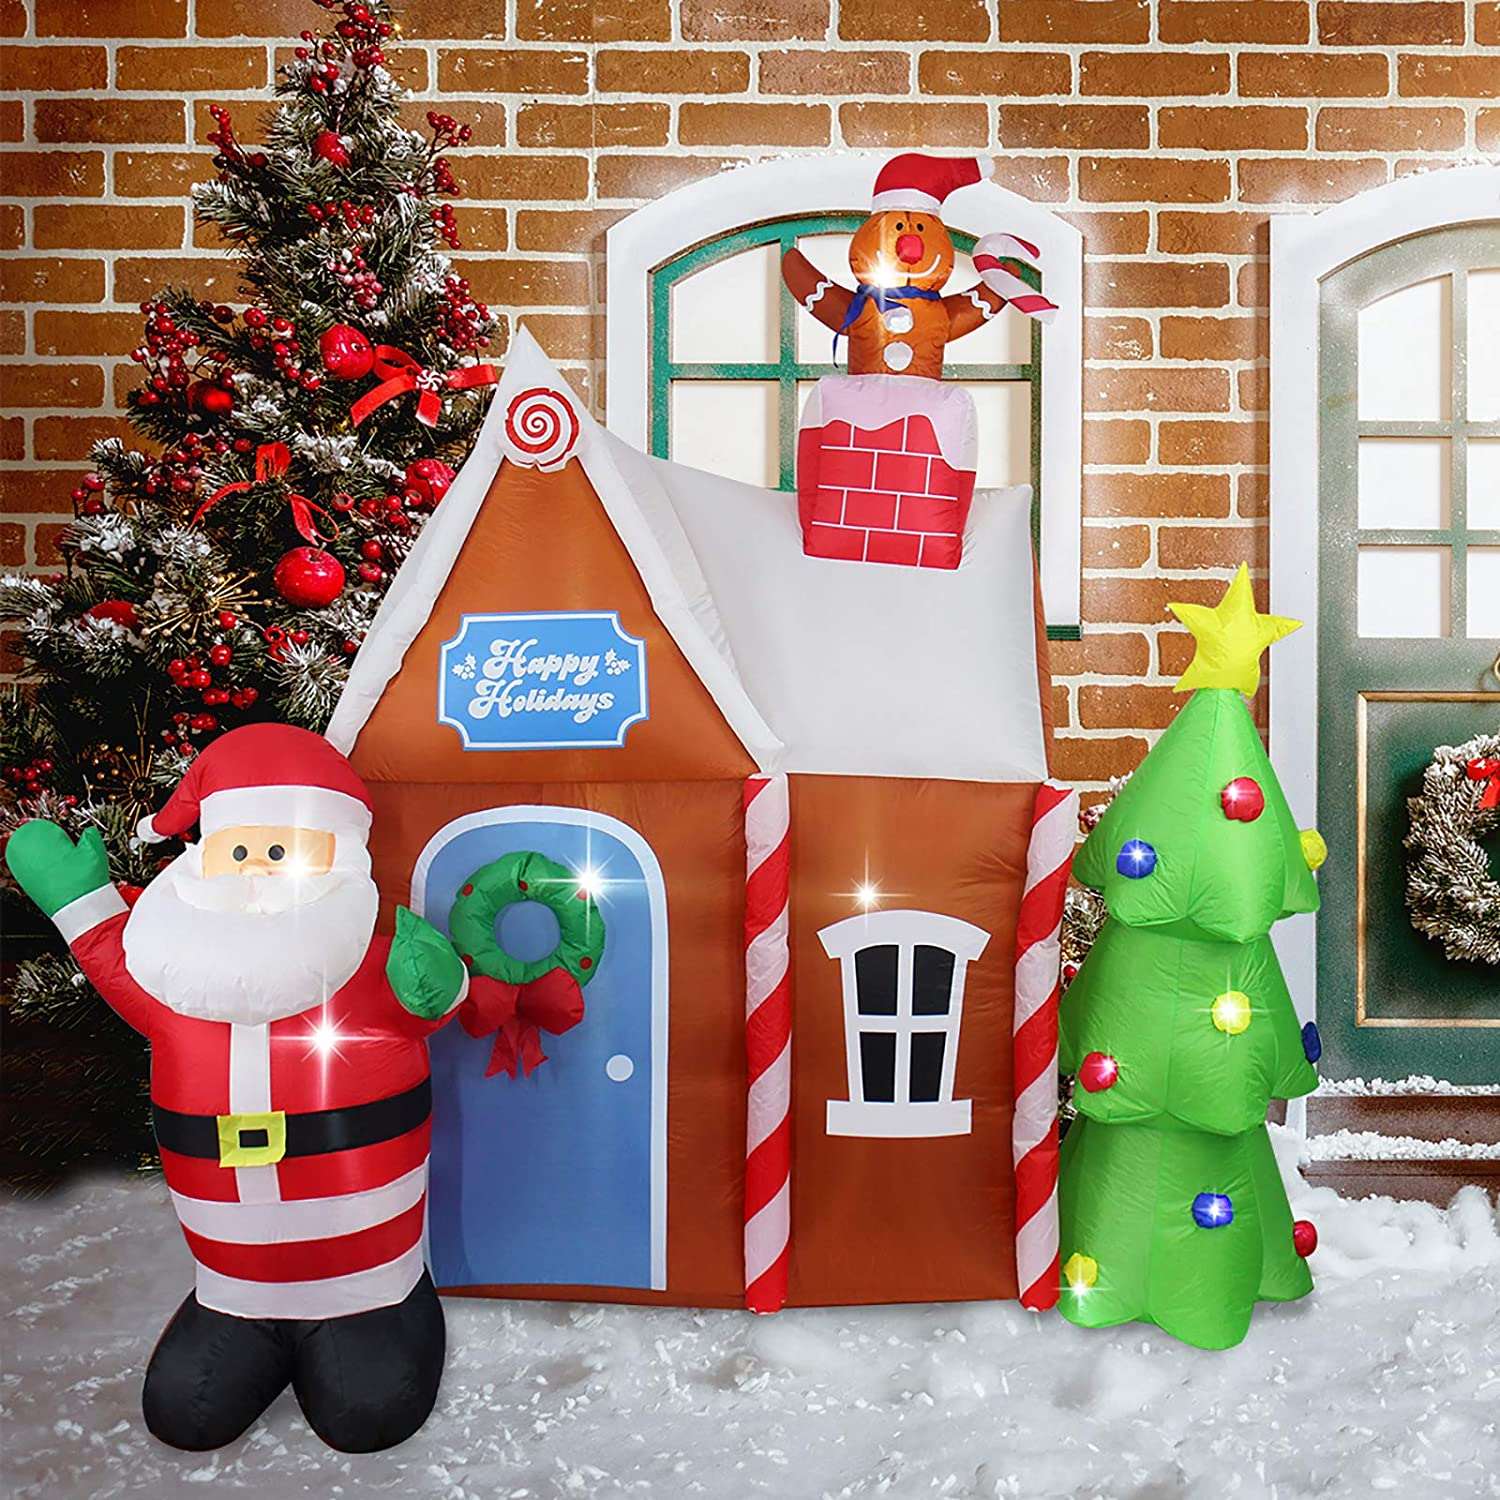 7ft Christmas Inflatable Decorations Gingerbread House With Santa Claus Blow Up Built-in LED Lighted For Outdoor Indoor Yard, Christmas Inflatable, Christmas Inflatable Decoration, Holiday Season Inflatable, Christmas inflatables, Christmas inflatables on Sale, Christmas inflatables 2022, Christmas inflatables lowes, Christmas inflatables wholesale